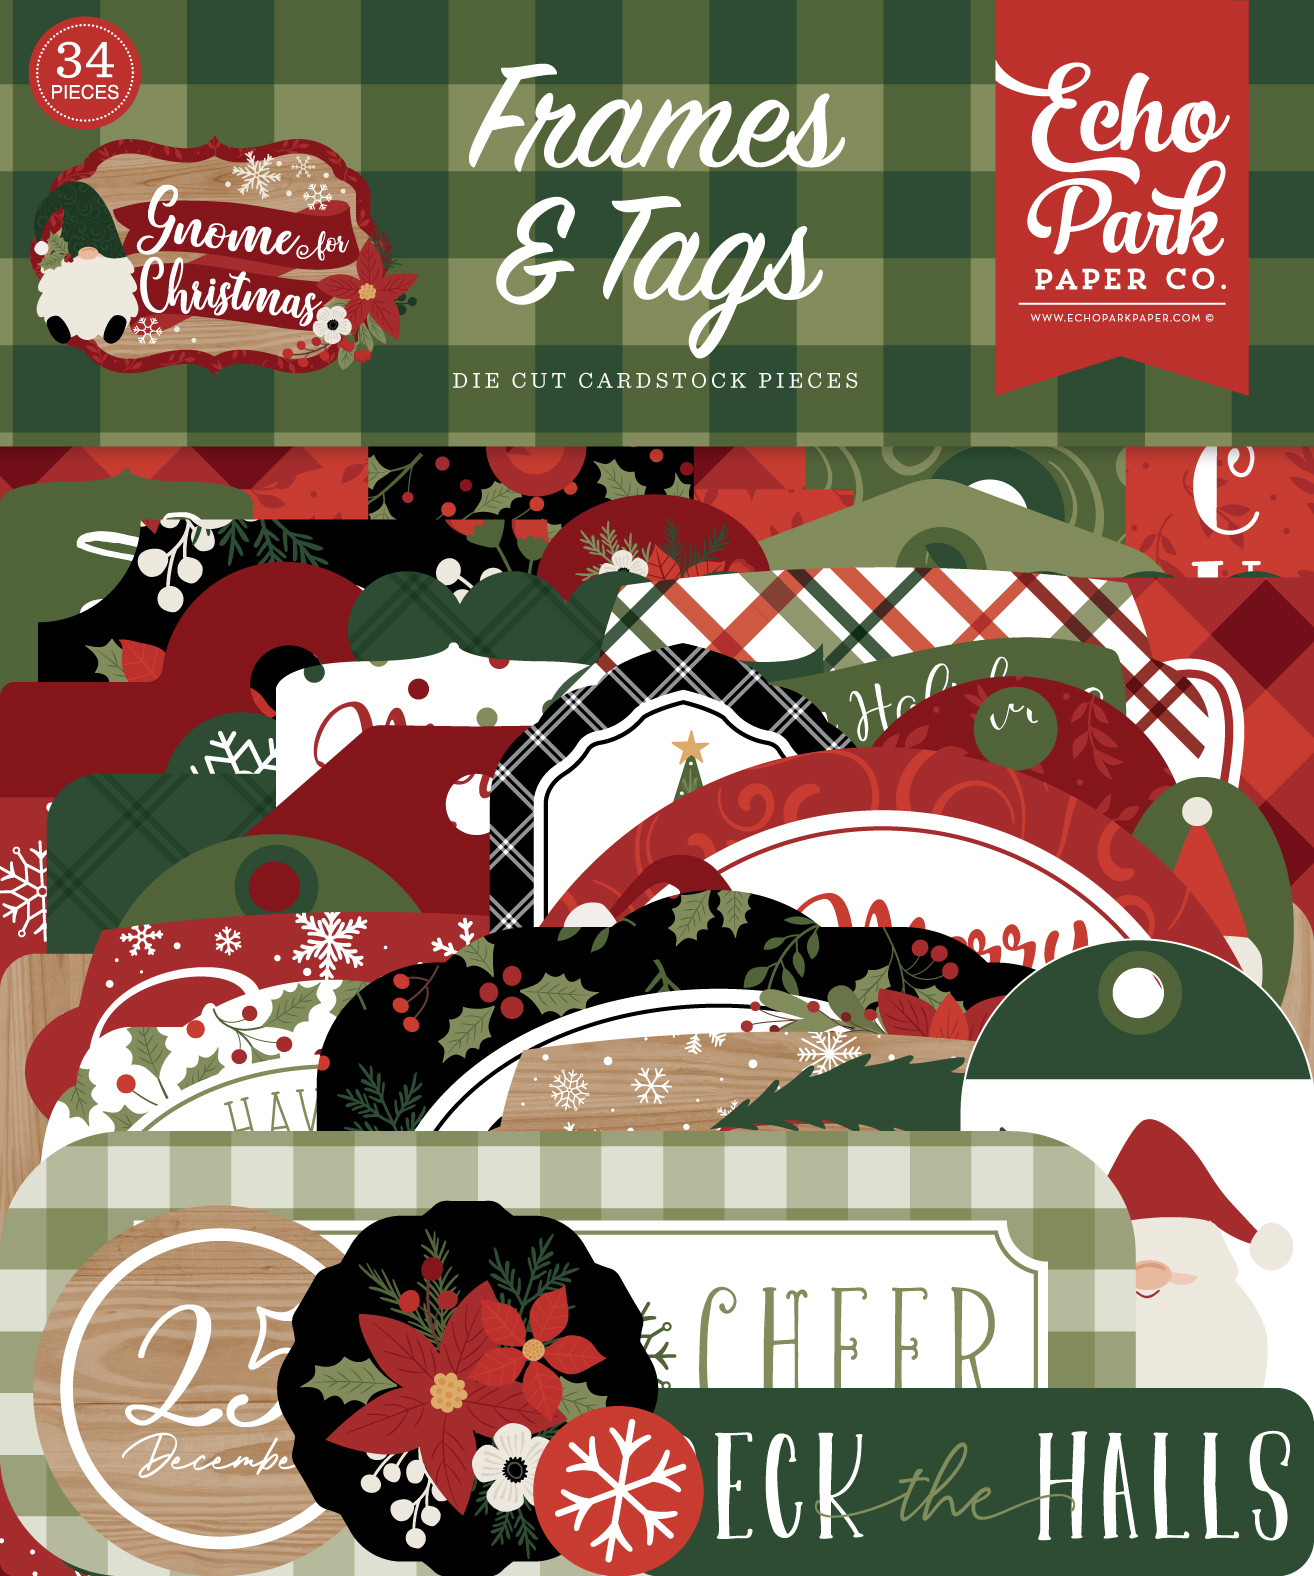 Gnome For Christmas Frames & Tags - Echo Park Paper Co.